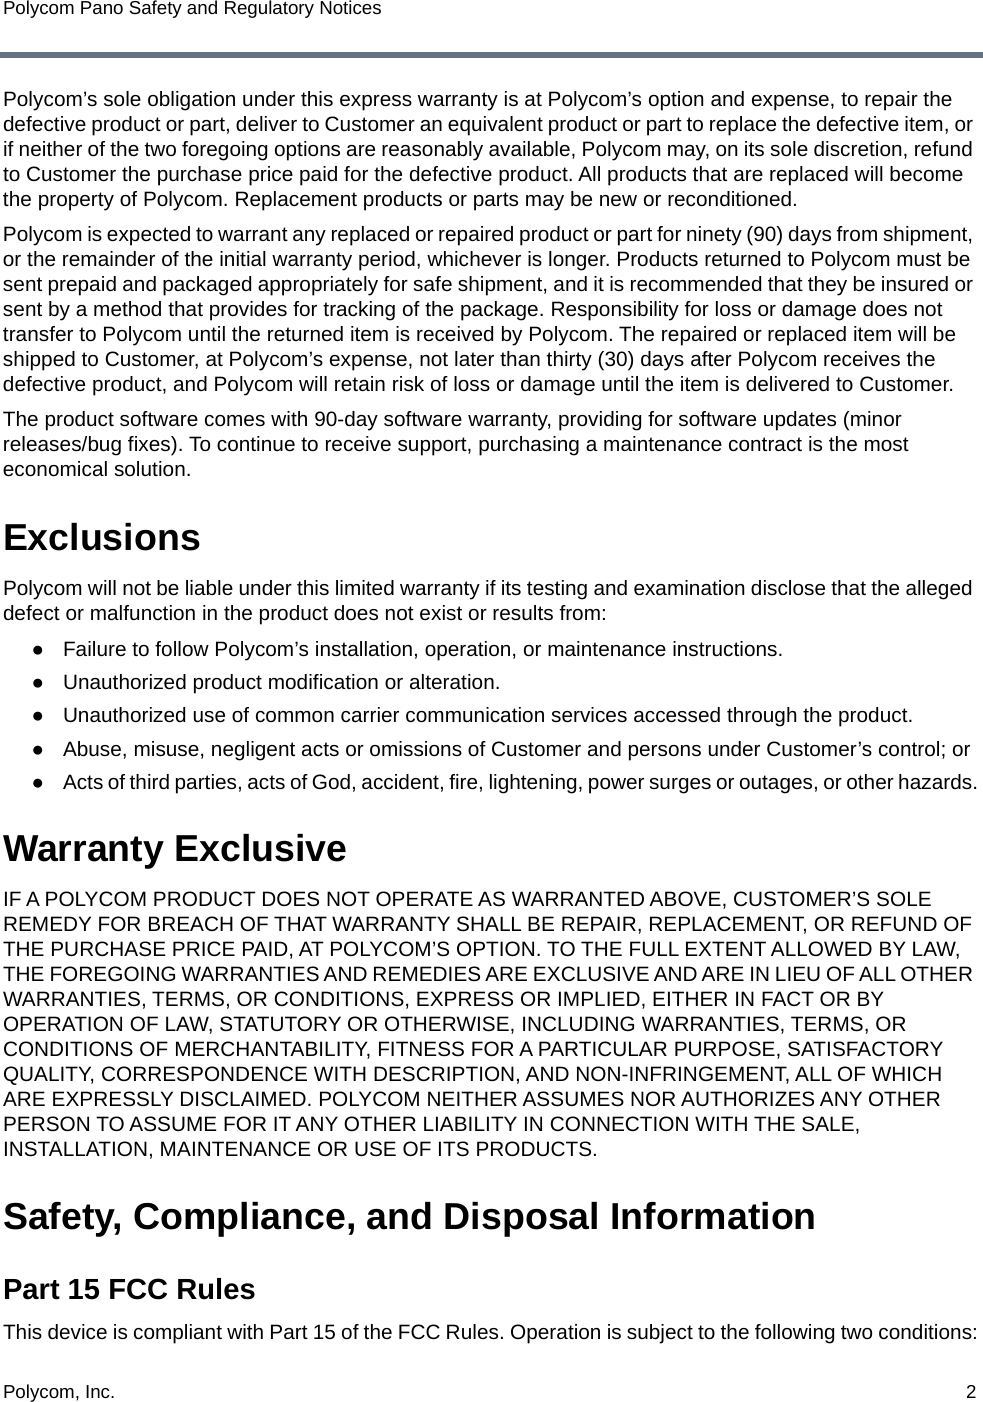 Polycom, Inc.  2Polycom Pano Safety and Regulatory NoticesPolycom’s sole obligation under this express warranty is at Polycom’s option and expense, to repair the defective product or part, deliver to Customer an equivalent product or part to replace the defective item, or if neither of the two foregoing options are reasonably available, Polycom may, on its sole discretion, refund to Customer the purchase price paid for the defective product. All products that are replaced will become the property of Polycom. Replacement products or parts may be new or reconditioned.Polycom is expected to warrant any replaced or repaired product or part for ninety (90) days from shipment, or the remainder of the initial warranty period, whichever is longer. Products returned to Polycom must be sent prepaid and packaged appropriately for safe shipment, and it is recommended that they be insured or sent by a method that provides for tracking of the package. Responsibility for loss or damage does not transfer to Polycom until the returned item is received by Polycom. The repaired or replaced item will be shipped to Customer, at Polycom’s expense, not later than thirty (30) days after Polycom receives the defective product, and Polycom will retain risk of loss or damage until the item is delivered to Customer.The product software comes with 90-day software warranty, providing for software updates (minor releases/bug fixes). To continue to receive support, purchasing a maintenance contract is the most economical solution.ExclusionsPolycom will not be liable under this limited warranty if its testing and examination disclose that the alleged defect or malfunction in the product does not exist or results from: ●Failure to follow Polycom’s installation, operation, or maintenance instructions.●Unauthorized product modification or alteration.●Unauthorized use of common carrier communication services accessed through the product.●Abuse, misuse, negligent acts or omissions of Customer and persons under Customer’s control; or●Acts of third parties, acts of God, accident, fire, lightening, power surges or outages, or other hazards.Warranty ExclusiveIF A POLYCOM PRODUCT DOES NOT OPERATE AS WARRANTED ABOVE, CUSTOMER’S SOLE REMEDY FOR BREACH OF THAT WARRANTY SHALL BE REPAIR, REPLACEMENT, OR REFUND OF THE PURCHASE PRICE PAID, AT POLYCOM’S OPTION. TO THE FULL EXTENT ALLOWED BY LAW, THE FOREGOING WARRANTIES AND REMEDIES ARE EXCLUSIVE AND ARE IN LIEU OF ALL OTHER WARRANTIES, TERMS, OR CONDITIONS, EXPRESS OR IMPLIED, EITHER IN FACT OR BY OPERATION OF LAW, STATUTORY OR OTHERWISE, INCLUDING WARRANTIES, TERMS, OR CONDITIONS OF MERCHANTABILITY, FITNESS FOR A PARTICULAR PURPOSE, SATISFACTORY QUALITY, CORRESPONDENCE WITH DESCRIPTION, AND NON-INFRINGEMENT, ALL OF WHICH ARE EXPRESSLY DISCLAIMED. POLYCOM NEITHER ASSUMES NOR AUTHORIZES ANY OTHER PERSON TO ASSUME FOR IT ANY OTHER LIABILITY IN CONNECTION WITH THE SALE, INSTALLATION, MAINTENANCE OR USE OF ITS PRODUCTS.Safety, Compliance, and Disposal InformationPart 15 FCC RulesThis device is compliant with Part 15 of the FCC Rules. Operation is subject to the following two conditions: